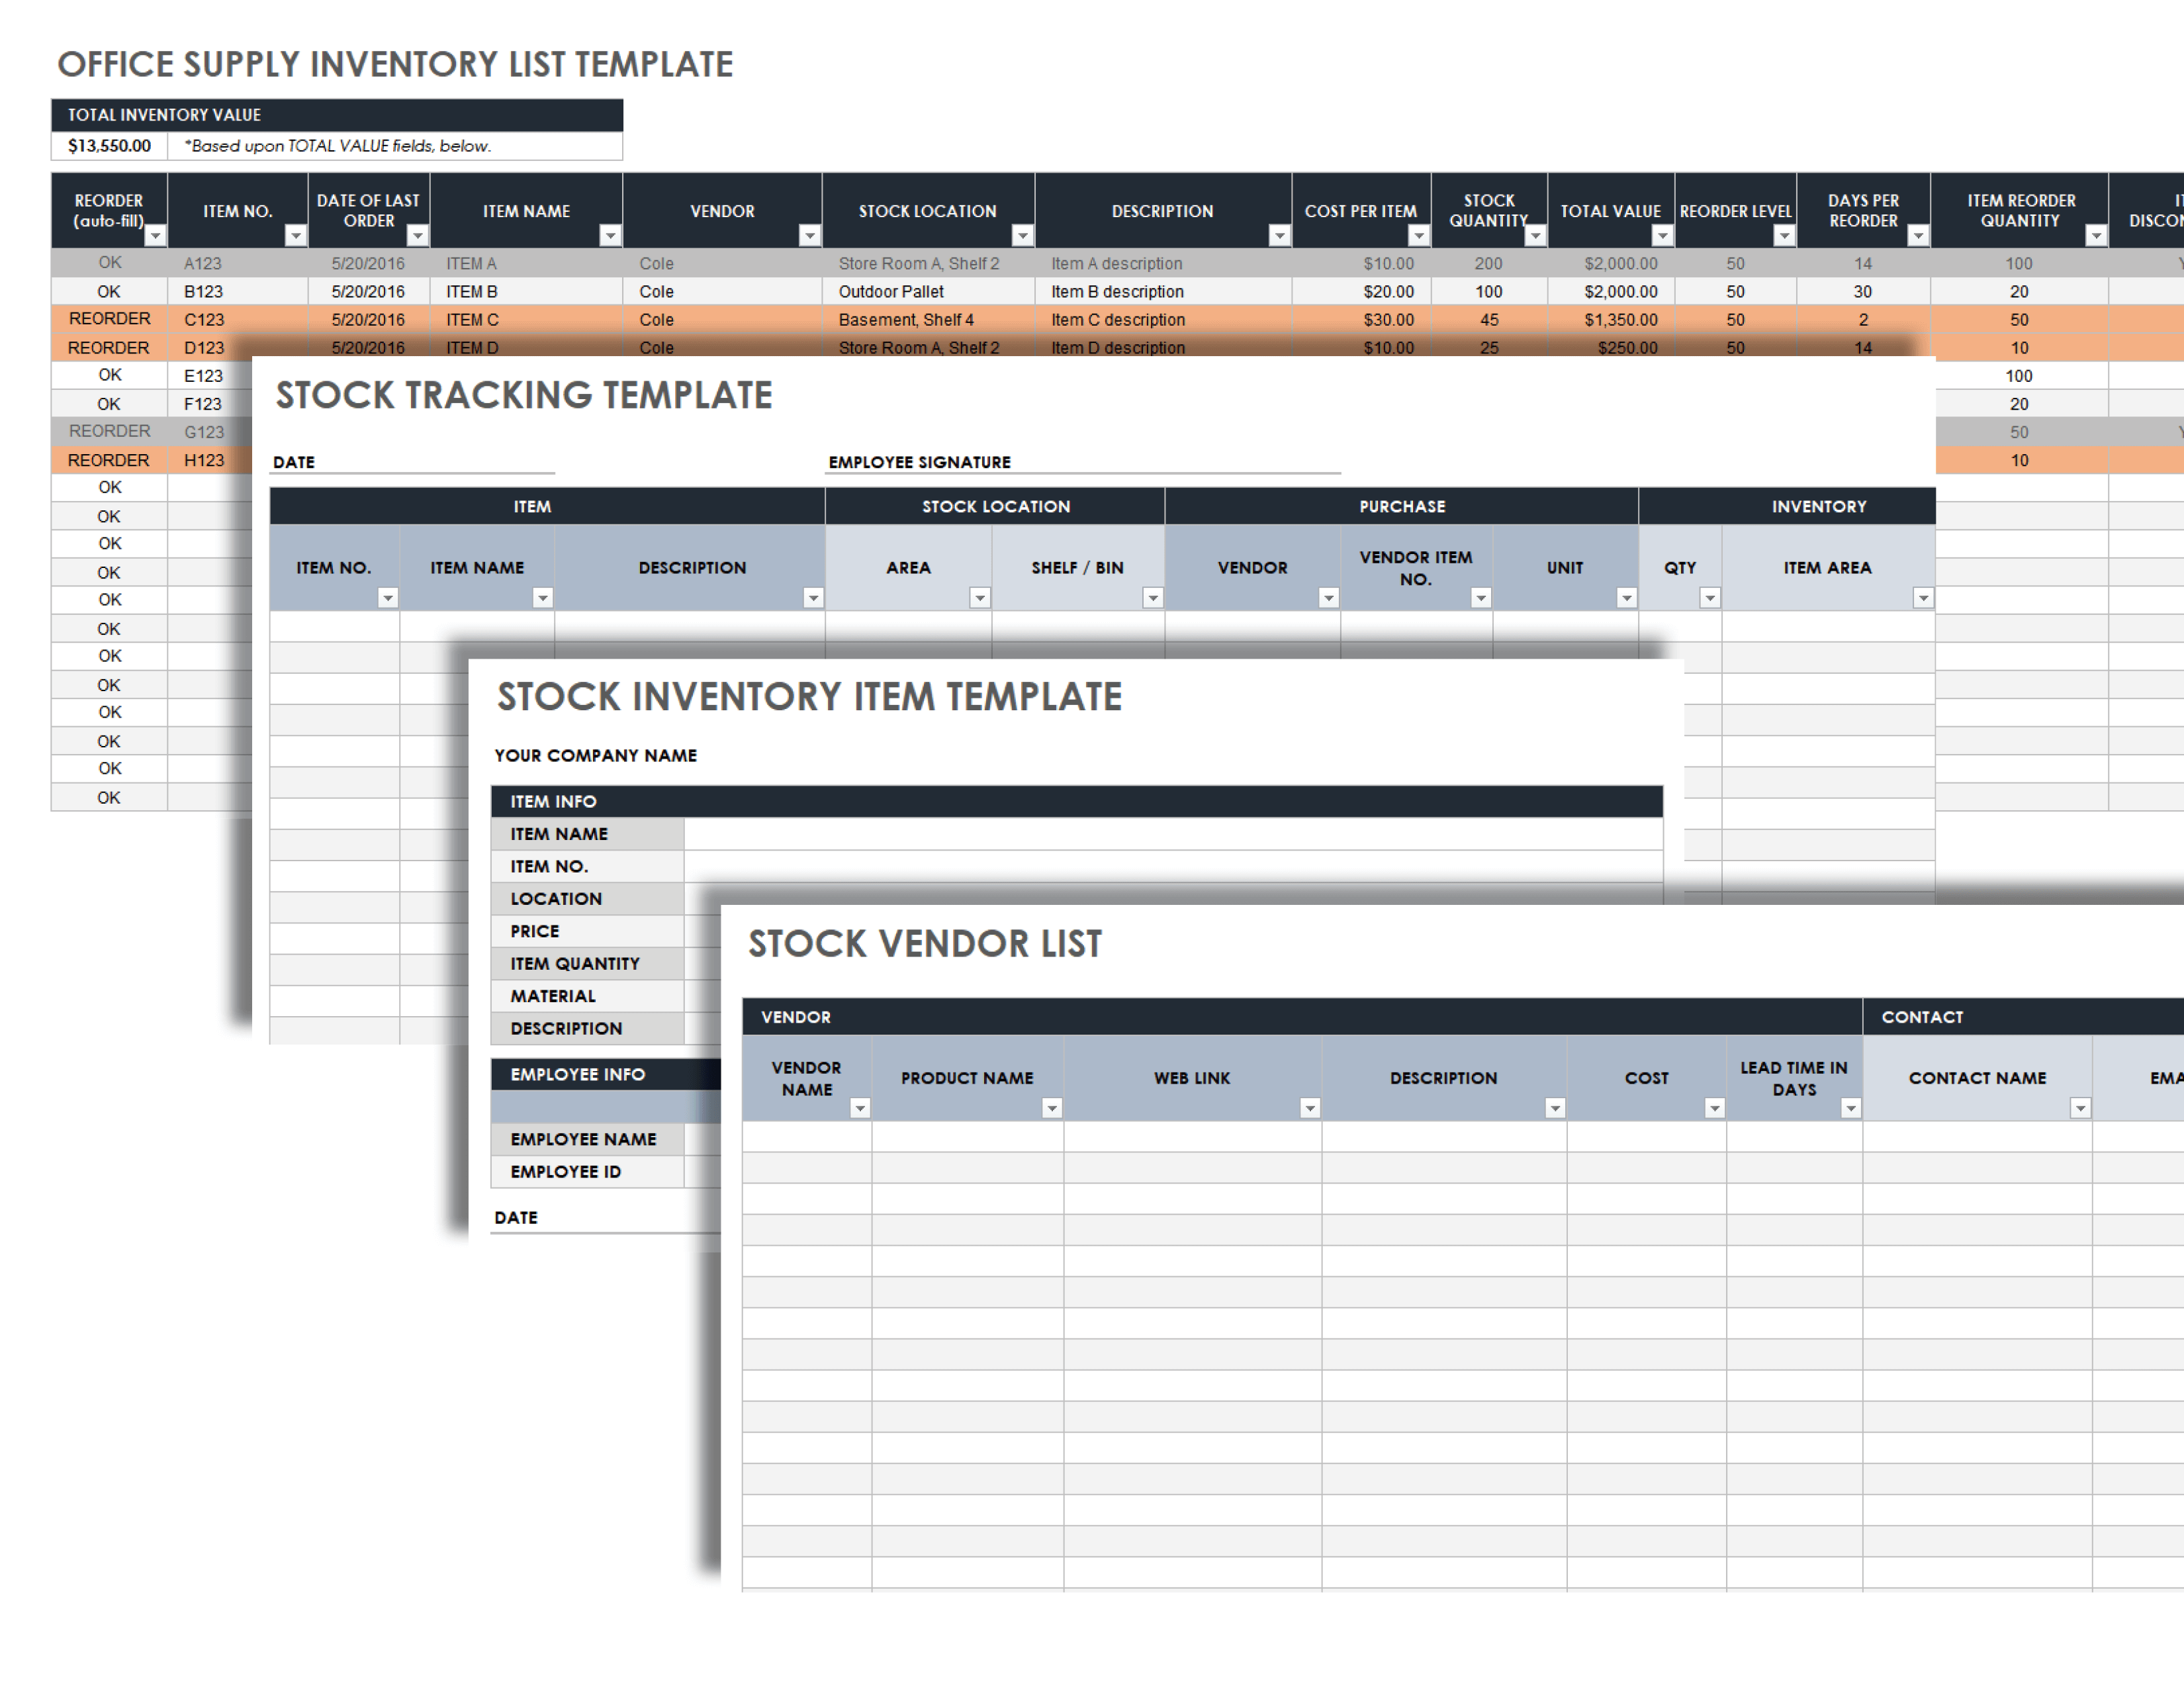 https://www.smartsheet.com/sites/default/files/2021-12/IC-Office-Supply-Inventory-List-Template.png